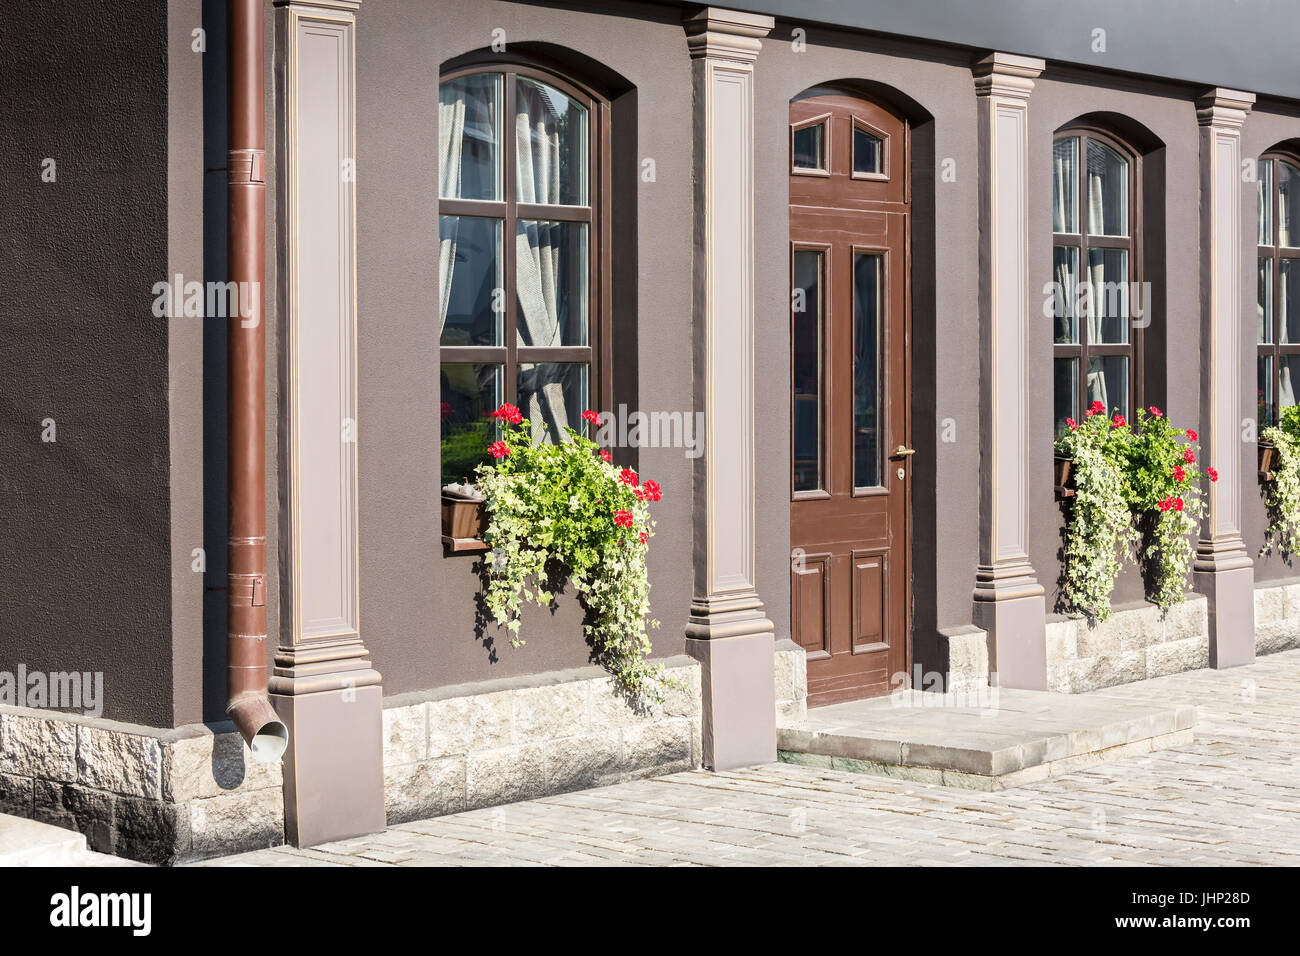 old house facade with windows decorated with ivy and geranium flowers in flowerpots Stock Photo